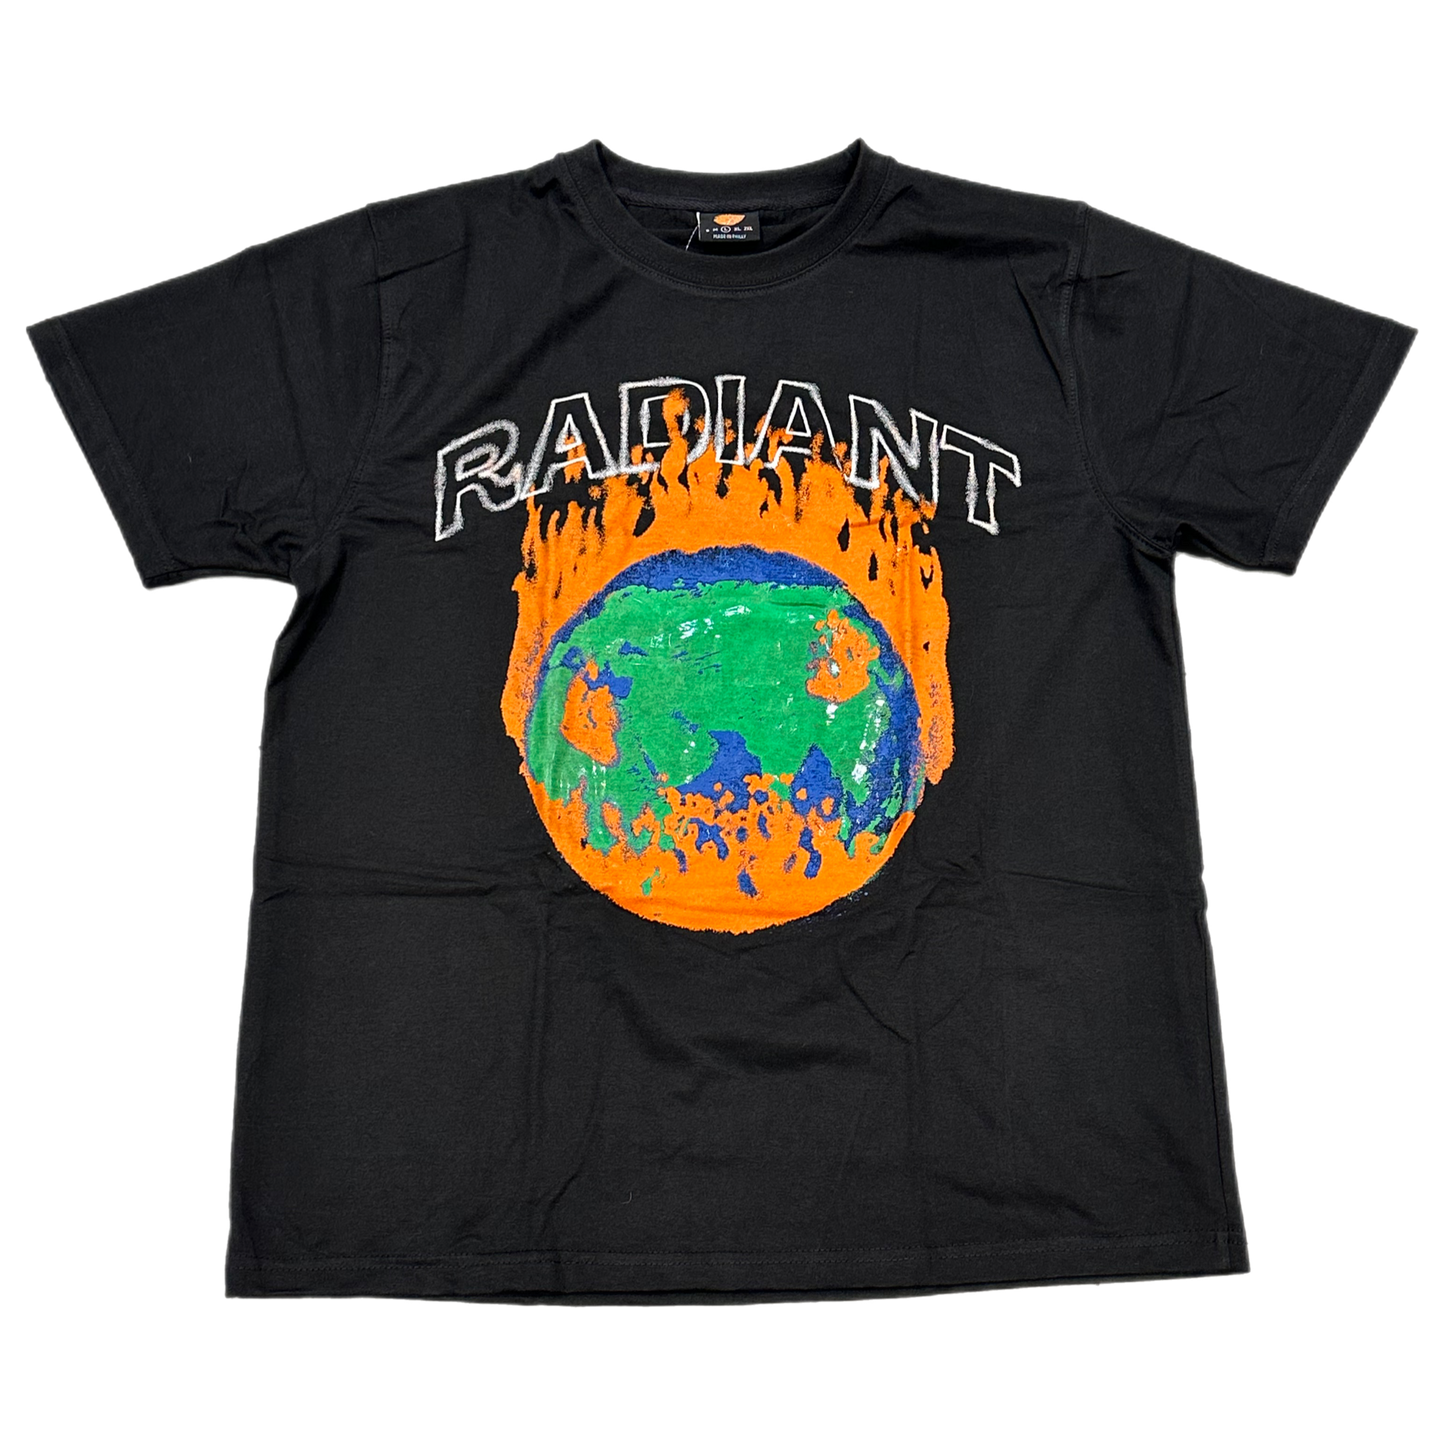 Proven Radiant - "World On Fire Black Tee"